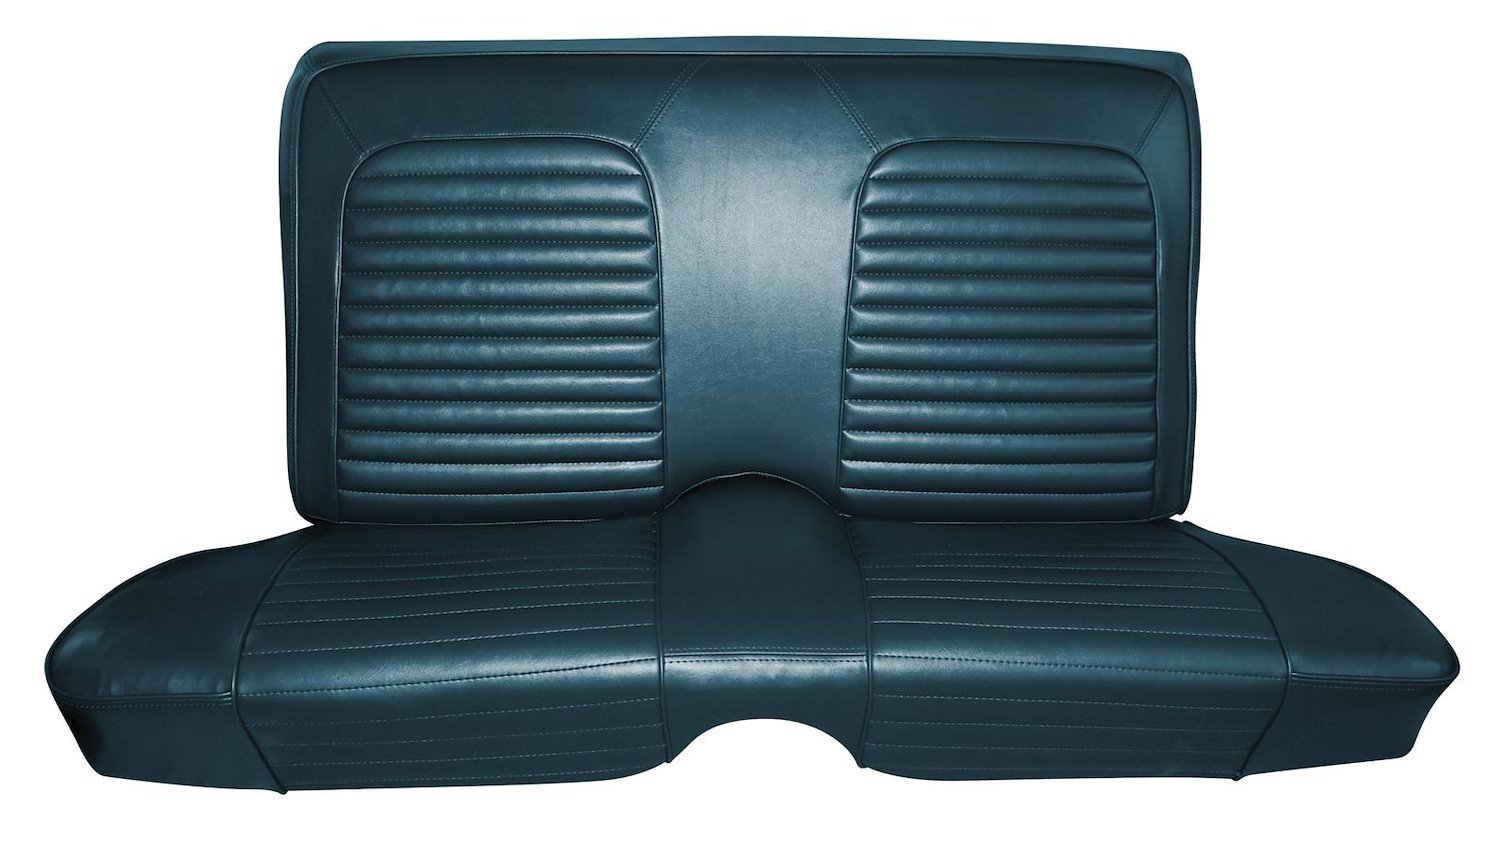 1969 Chevrolet Chevelle Malibu and Super Sport Convertible Interior Rear Bench Seat Upholstery Set